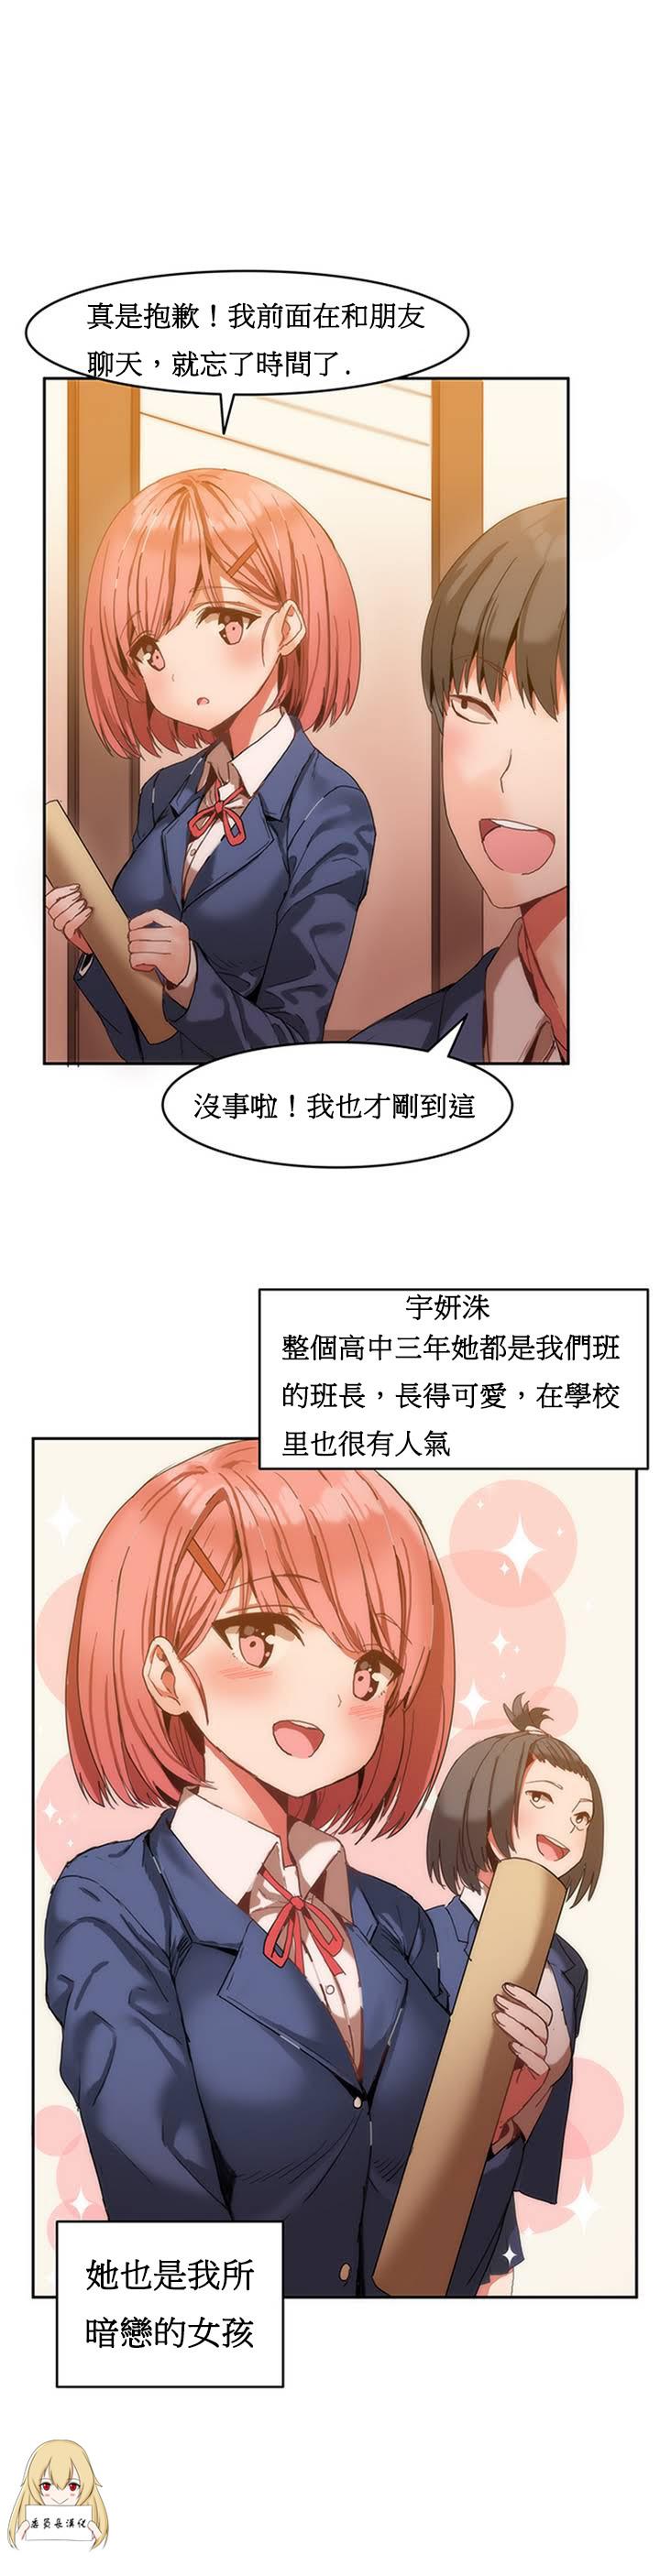 Amateur Porn Hahri's Lumpy Boardhouse Ch. 1~12【委員長個人漢化】（持續更新） Tease - Page 5